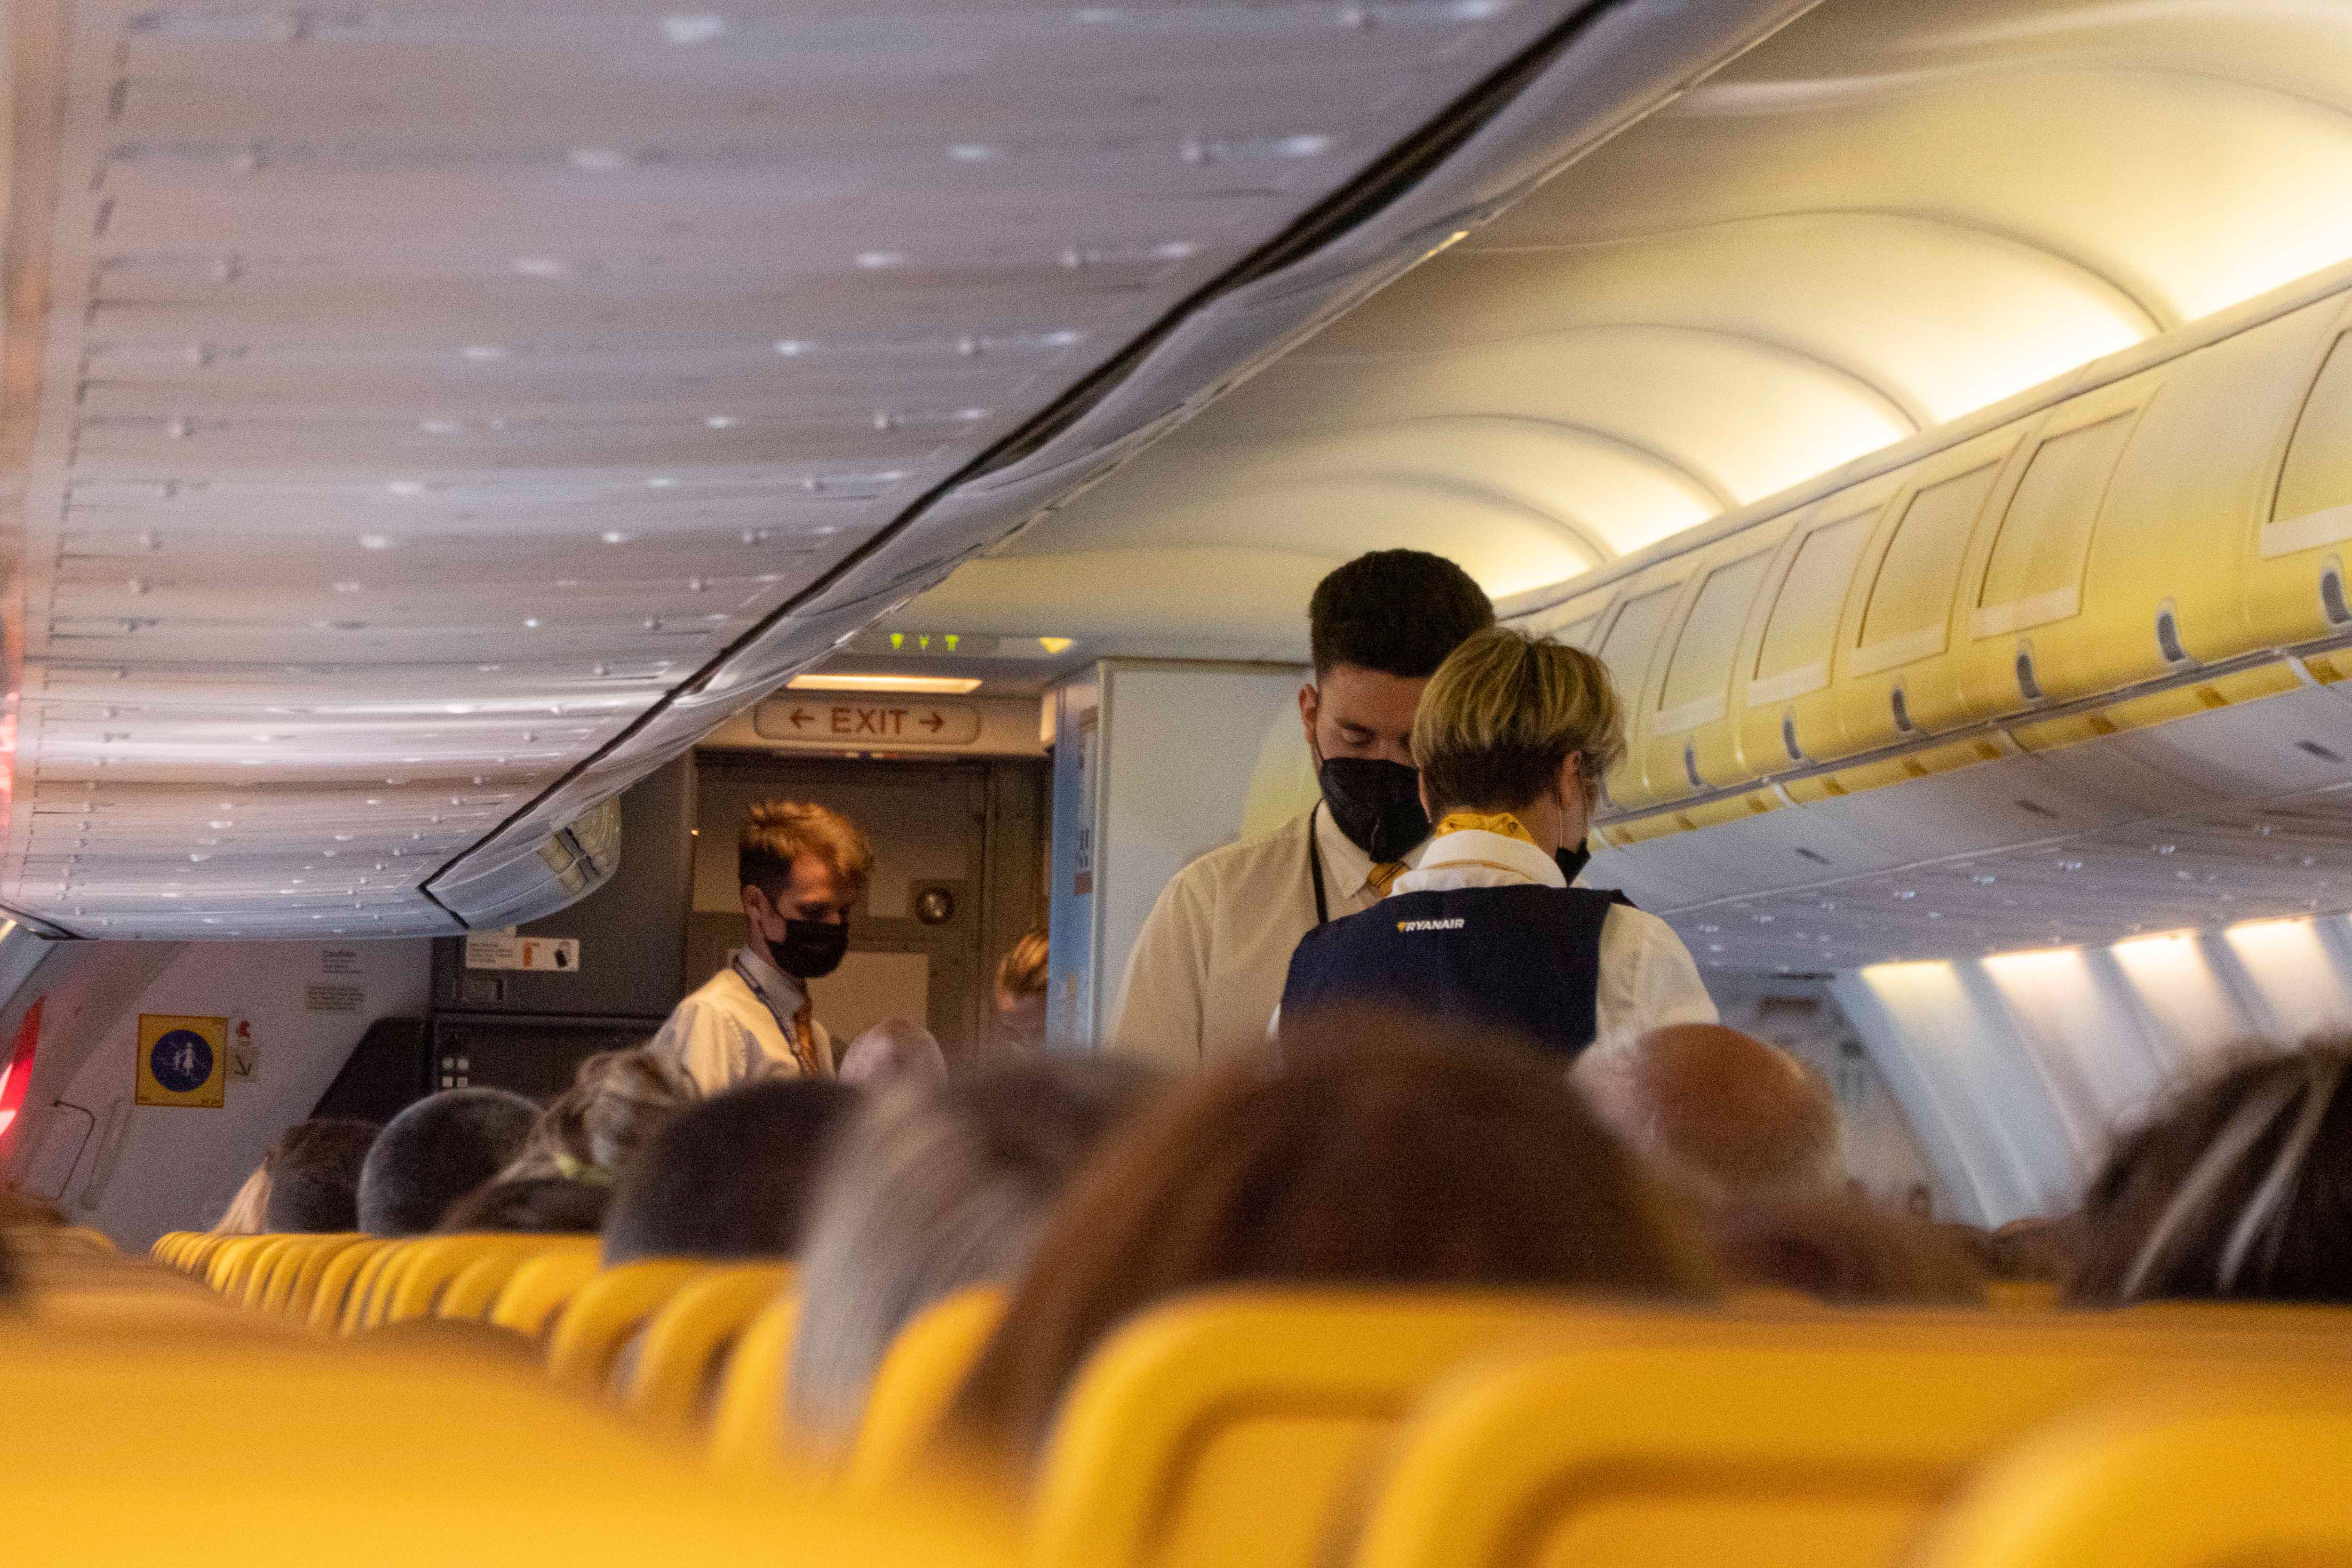 Which Country's Laws Are Enforced During International Flights?